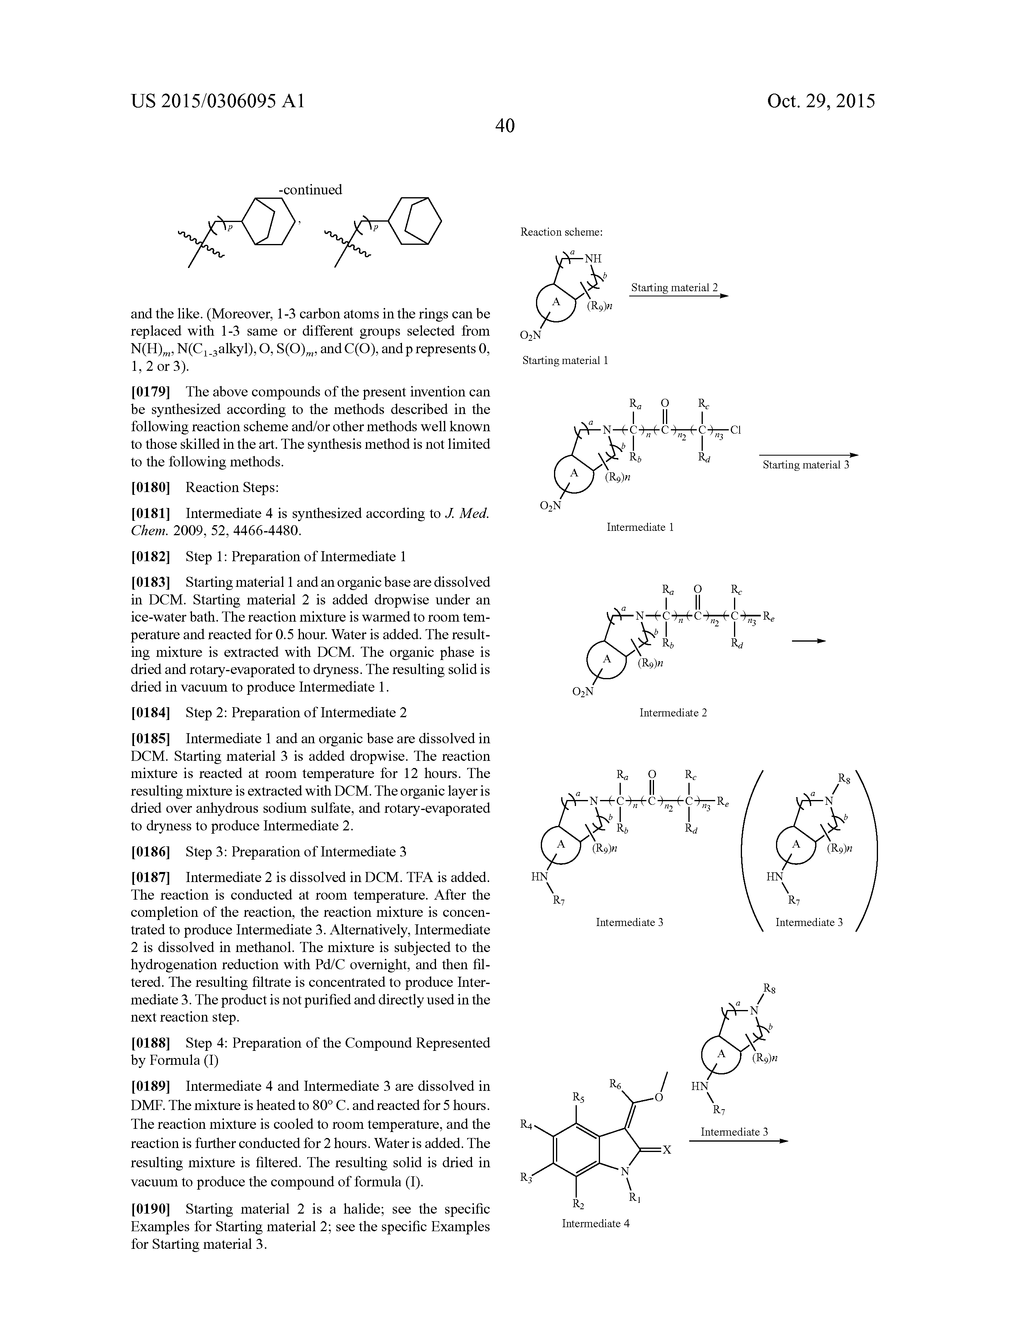 An Indolinone Derivative As Tyrosine Kinase Inhibitor - diagram, schematic, and image 41